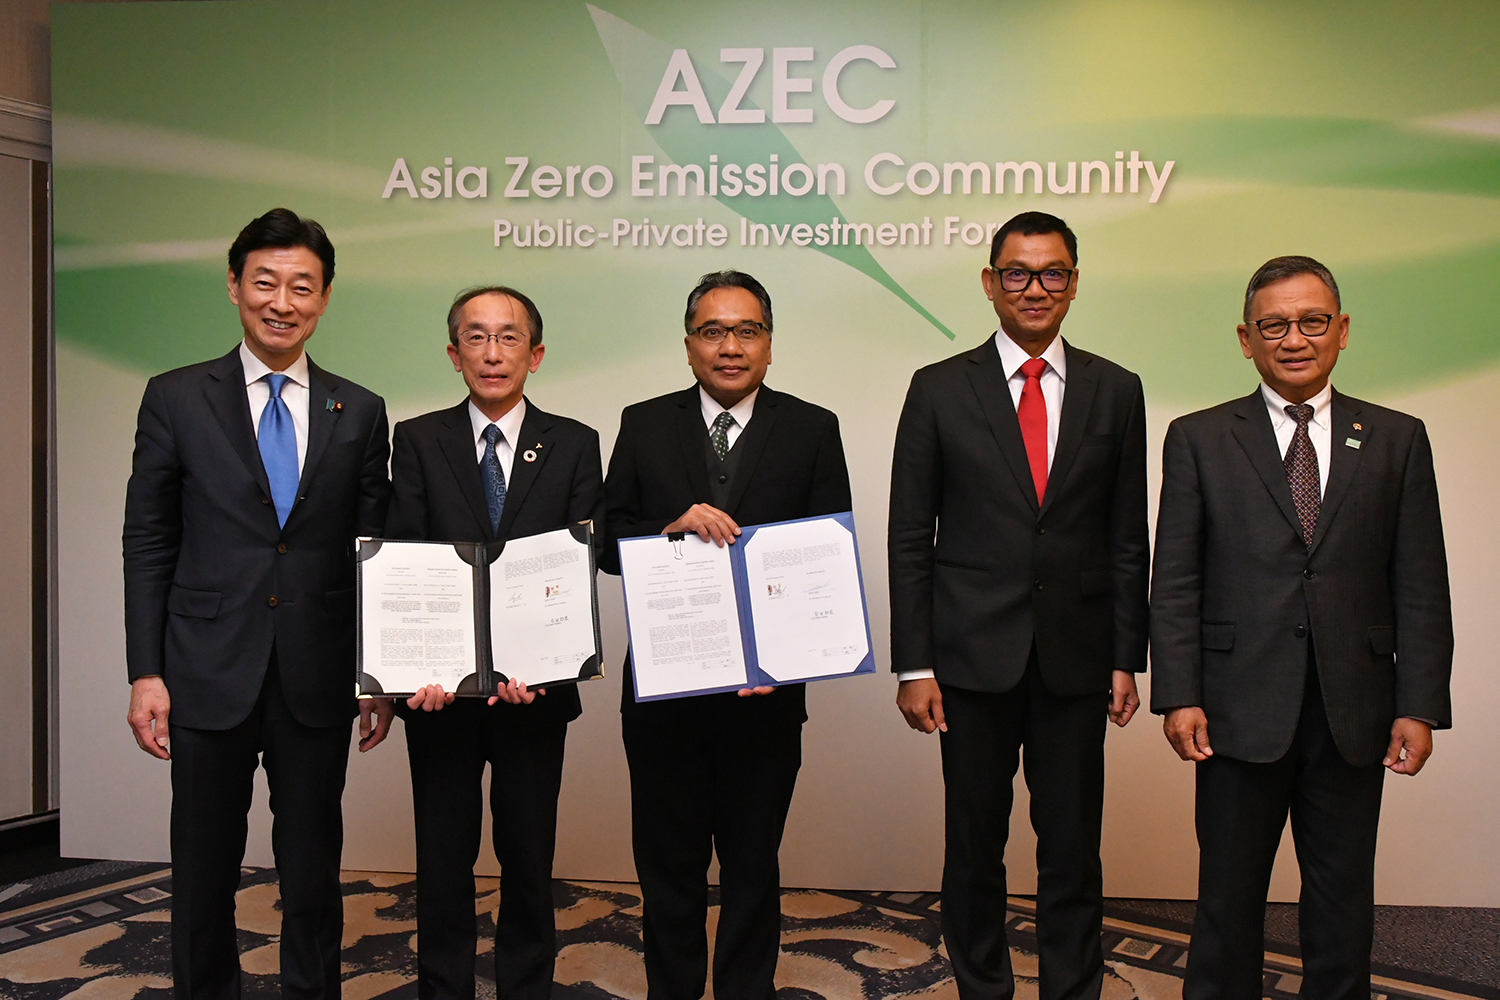 MOU Signing Announced at AZEC Public-Private Investment Forum